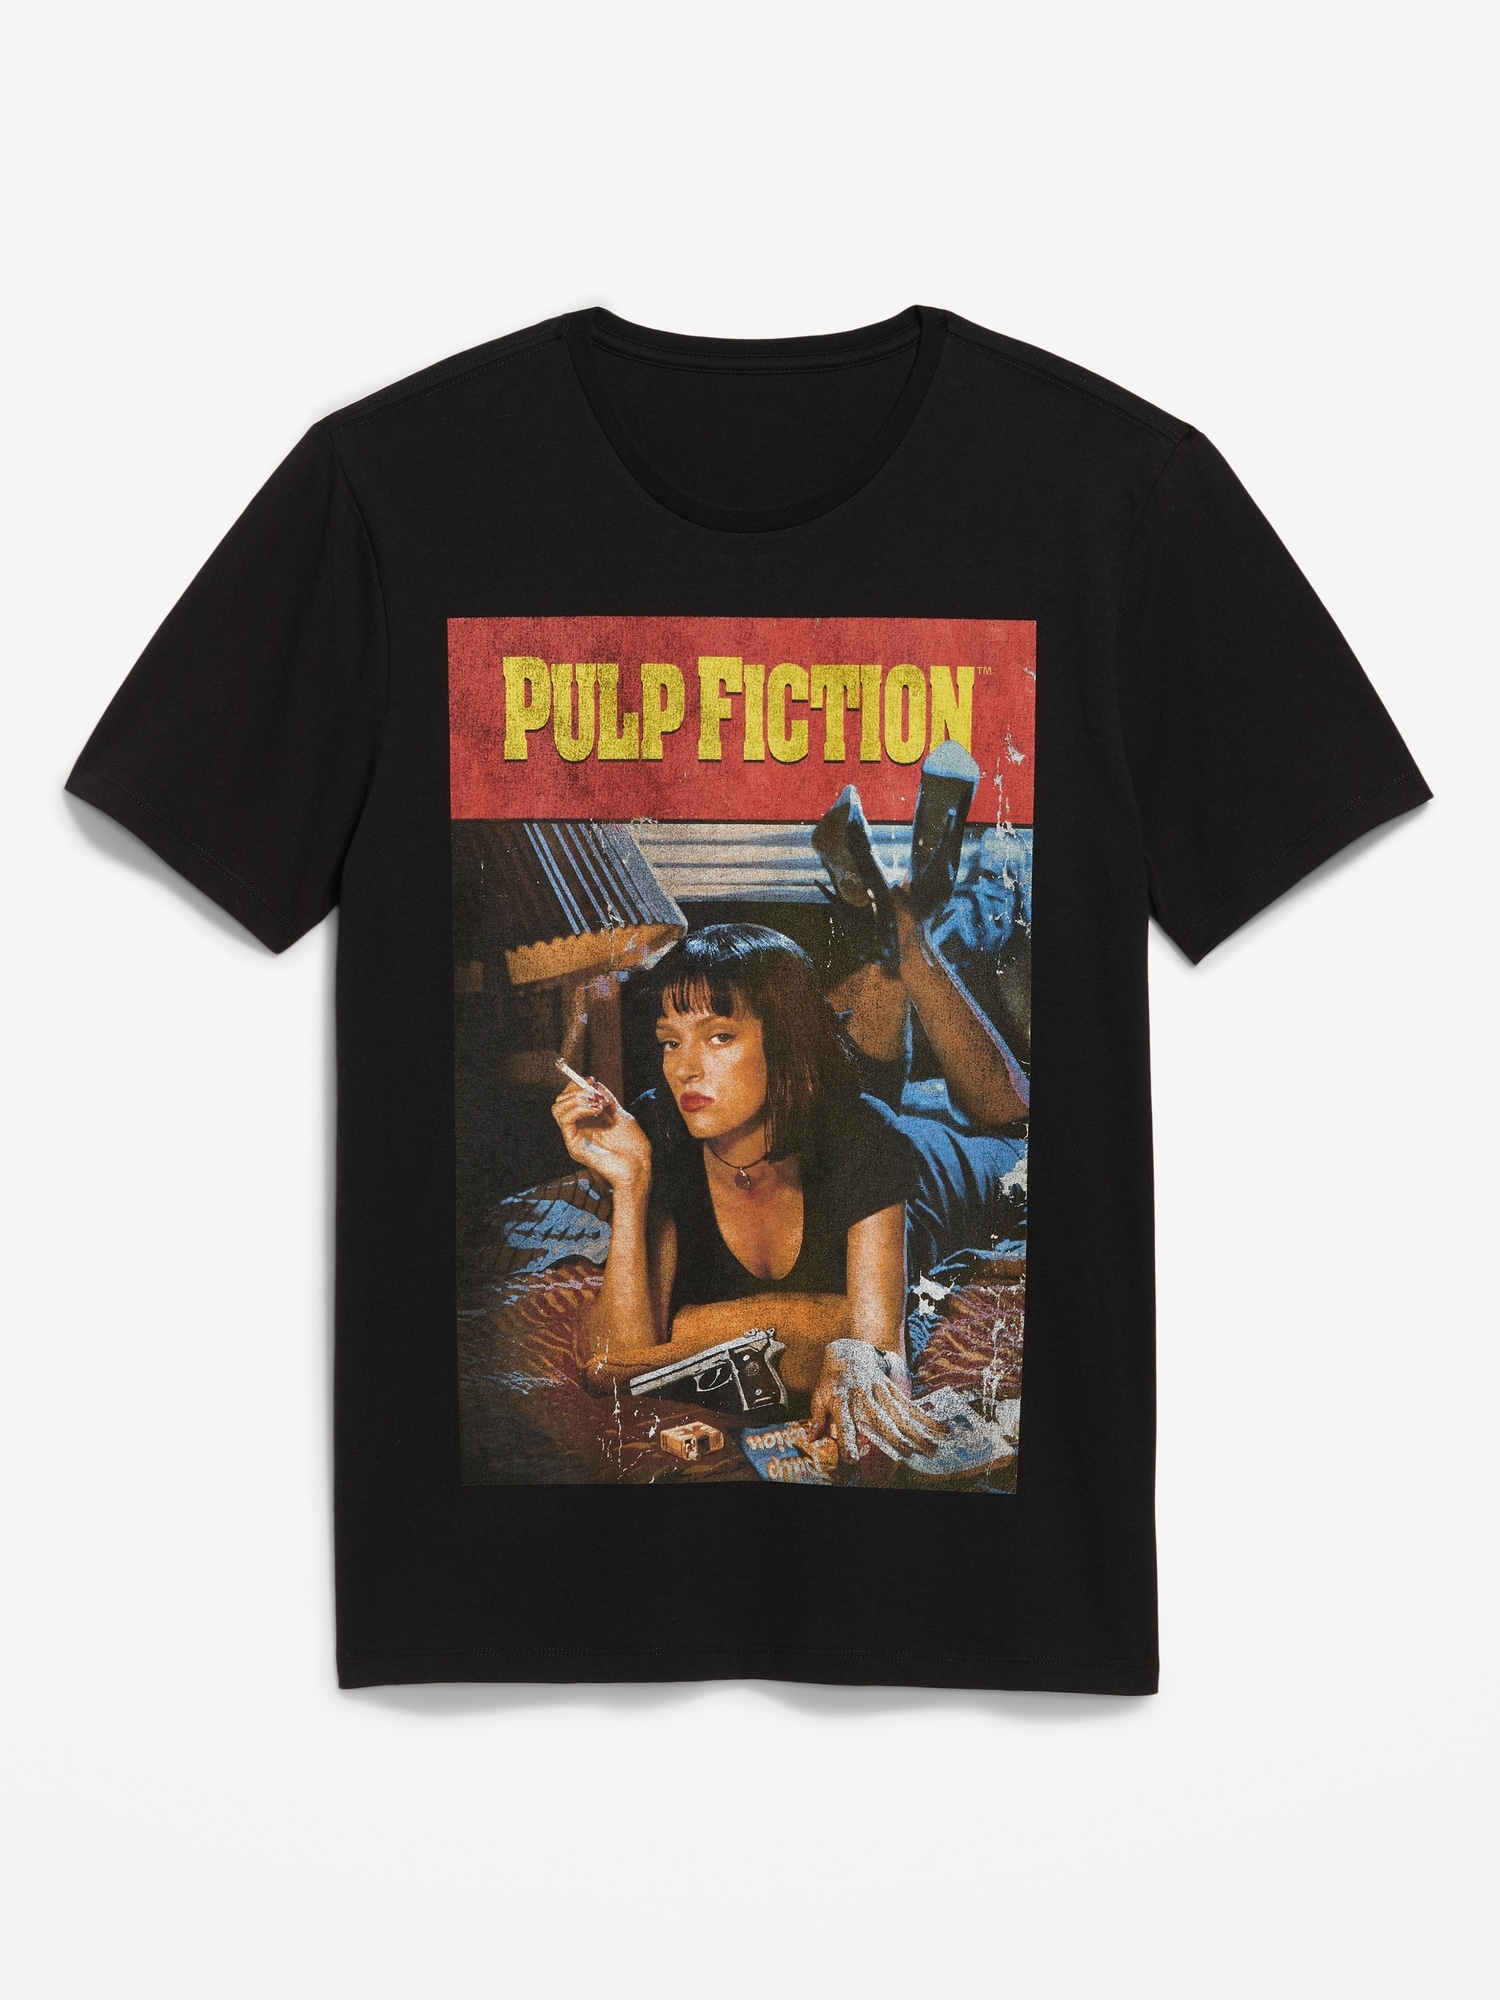 Pulp Fiction™ Gender-Neutral T-Shirt for Adults